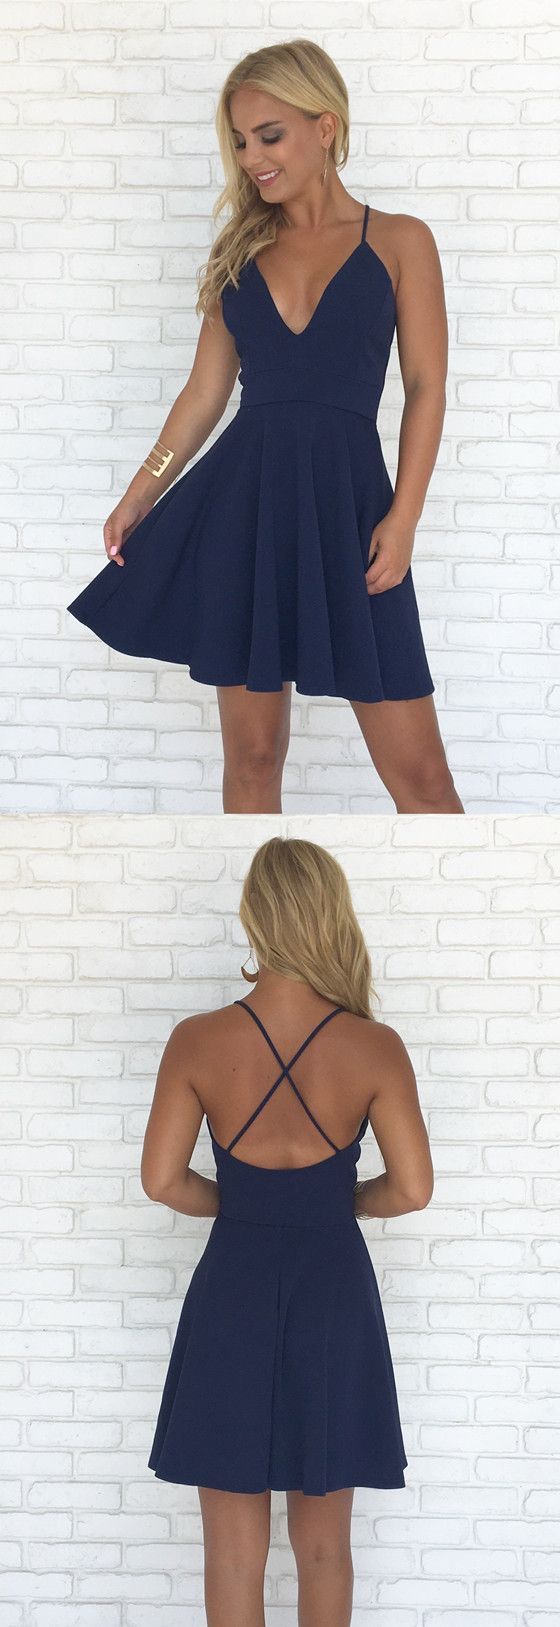 A-line Spaghetti Straps V-neck Backless Short Simple Cheap Homecoming Dresses, HD0424 -   19 dress Formal short ideas